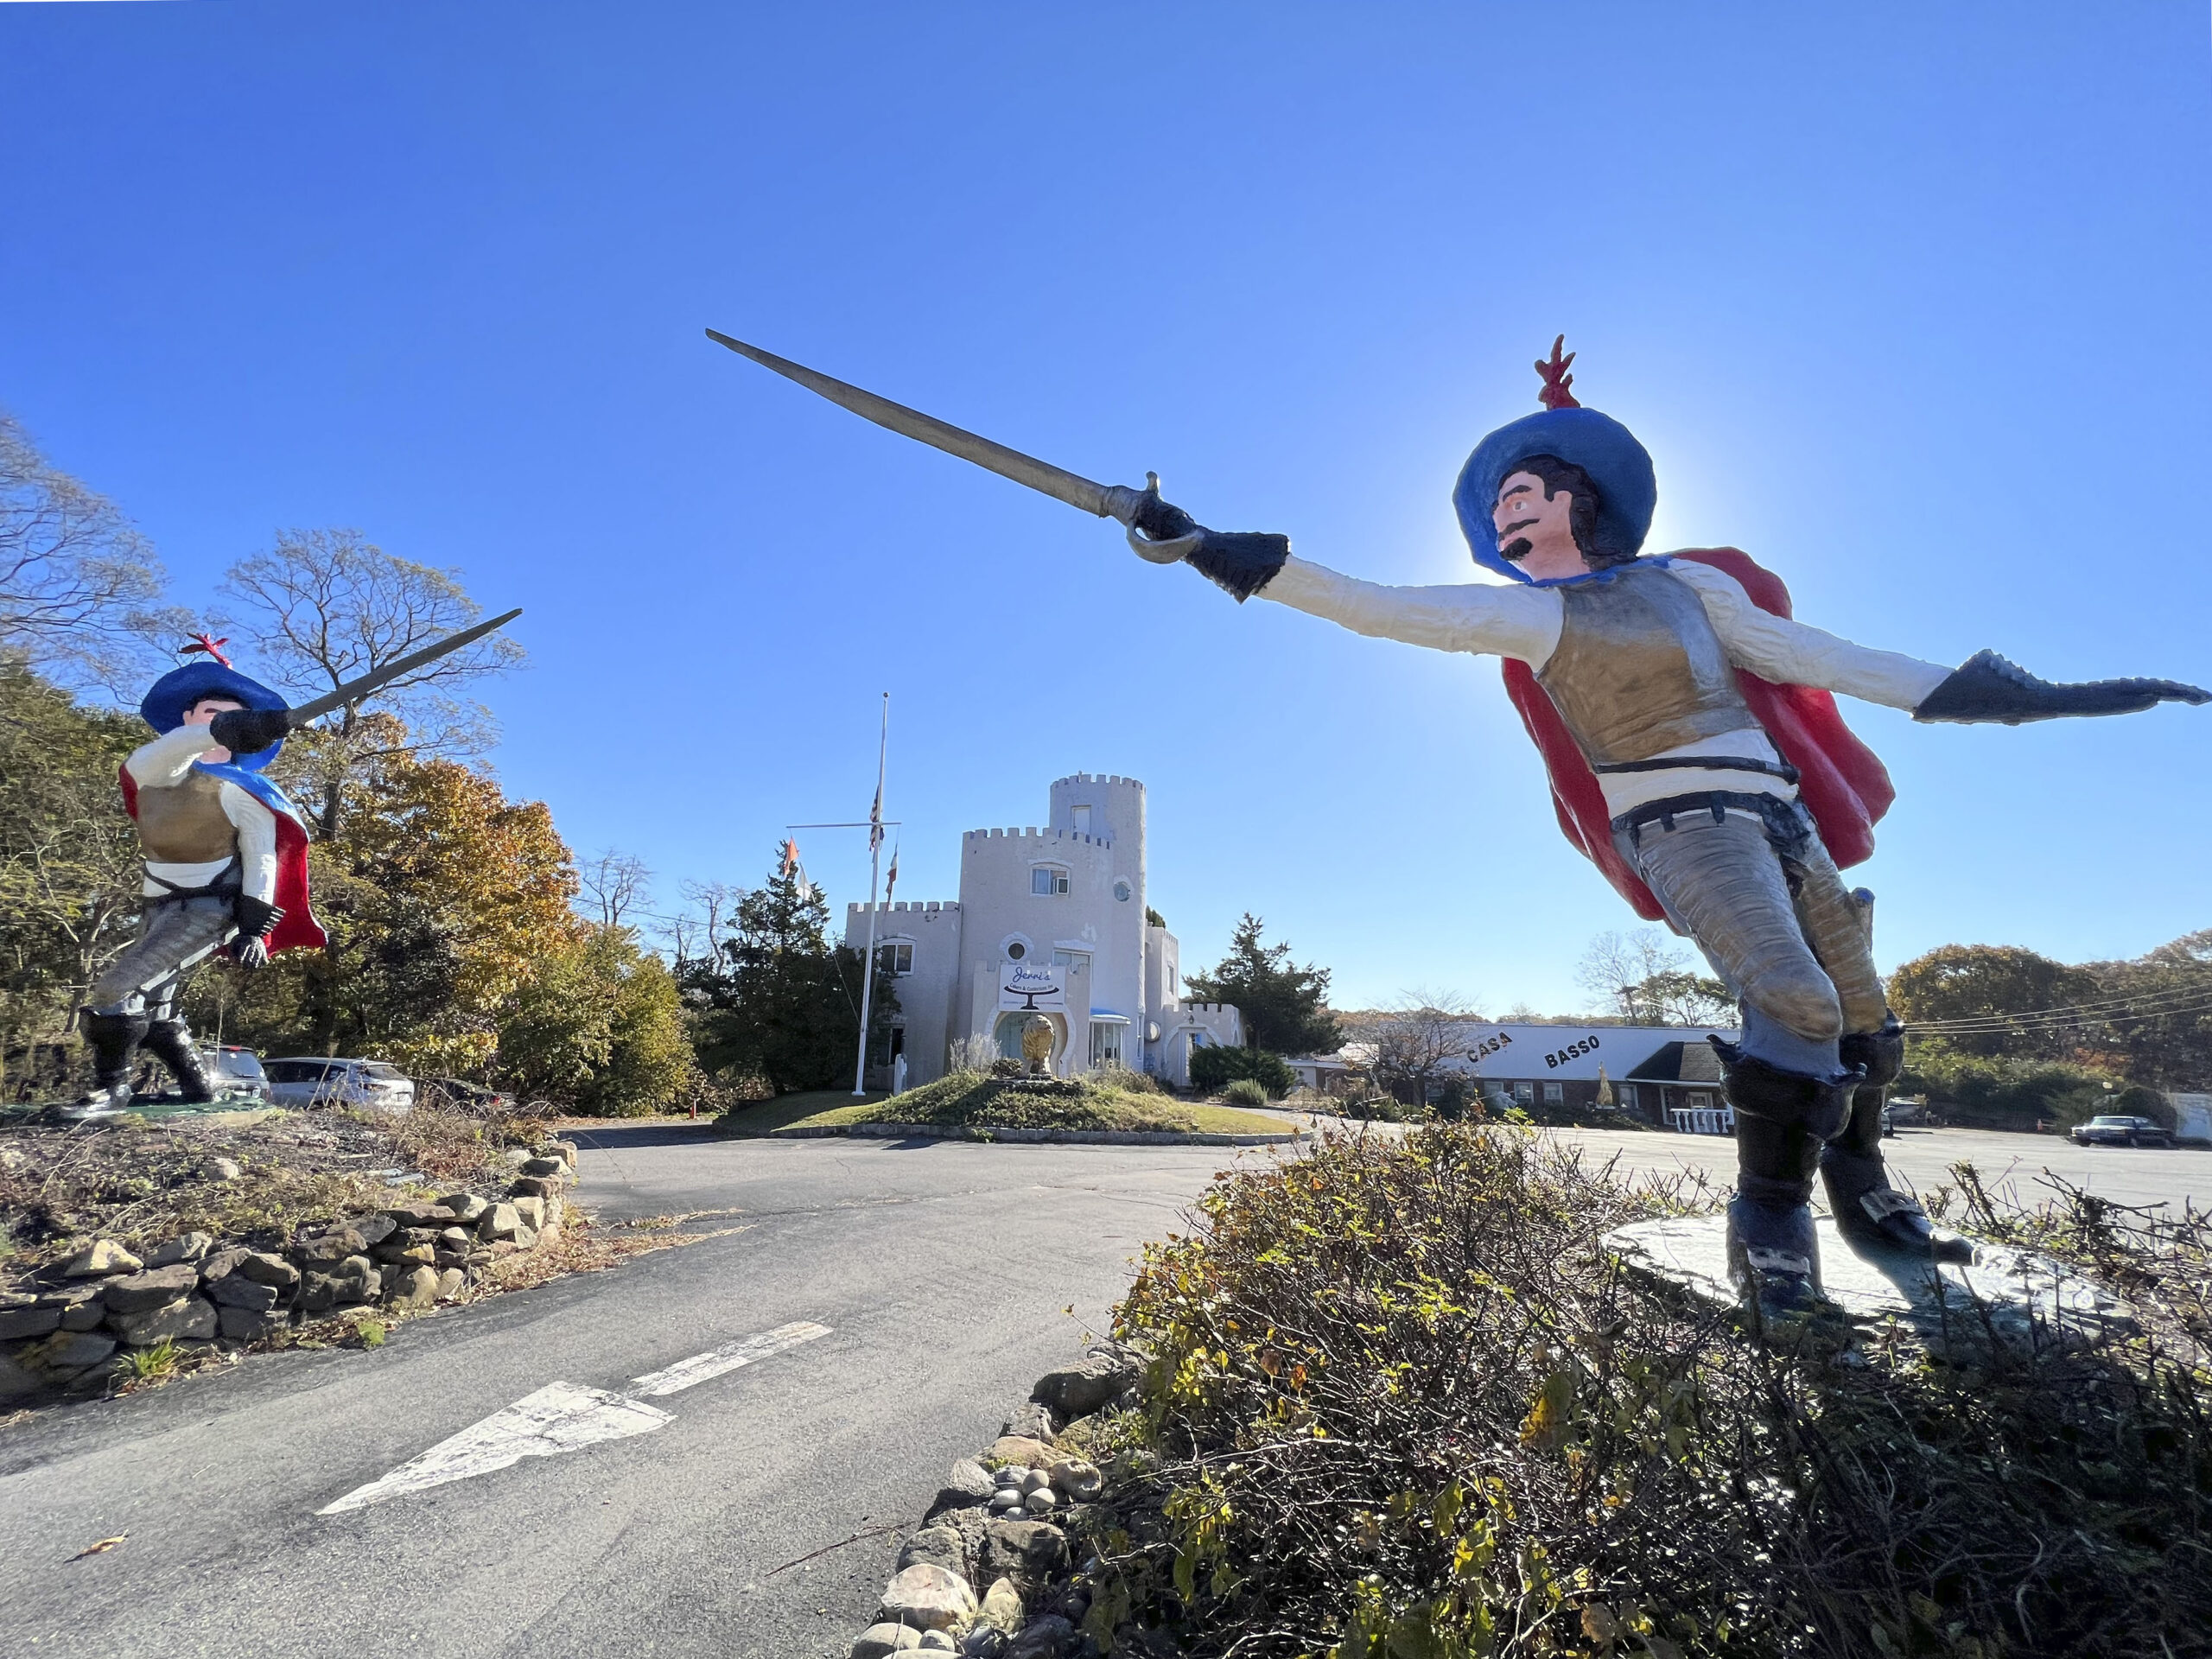 The Brouwer site on Montauk Highway in Westhampton as the location of Casa Basso, a restaurant opened by the Basso family in 1928, was distinguished by 12-foot-high statues of dueling cavaliers left by Brouwer when he closed his business and sold the property.   DANA SHAW